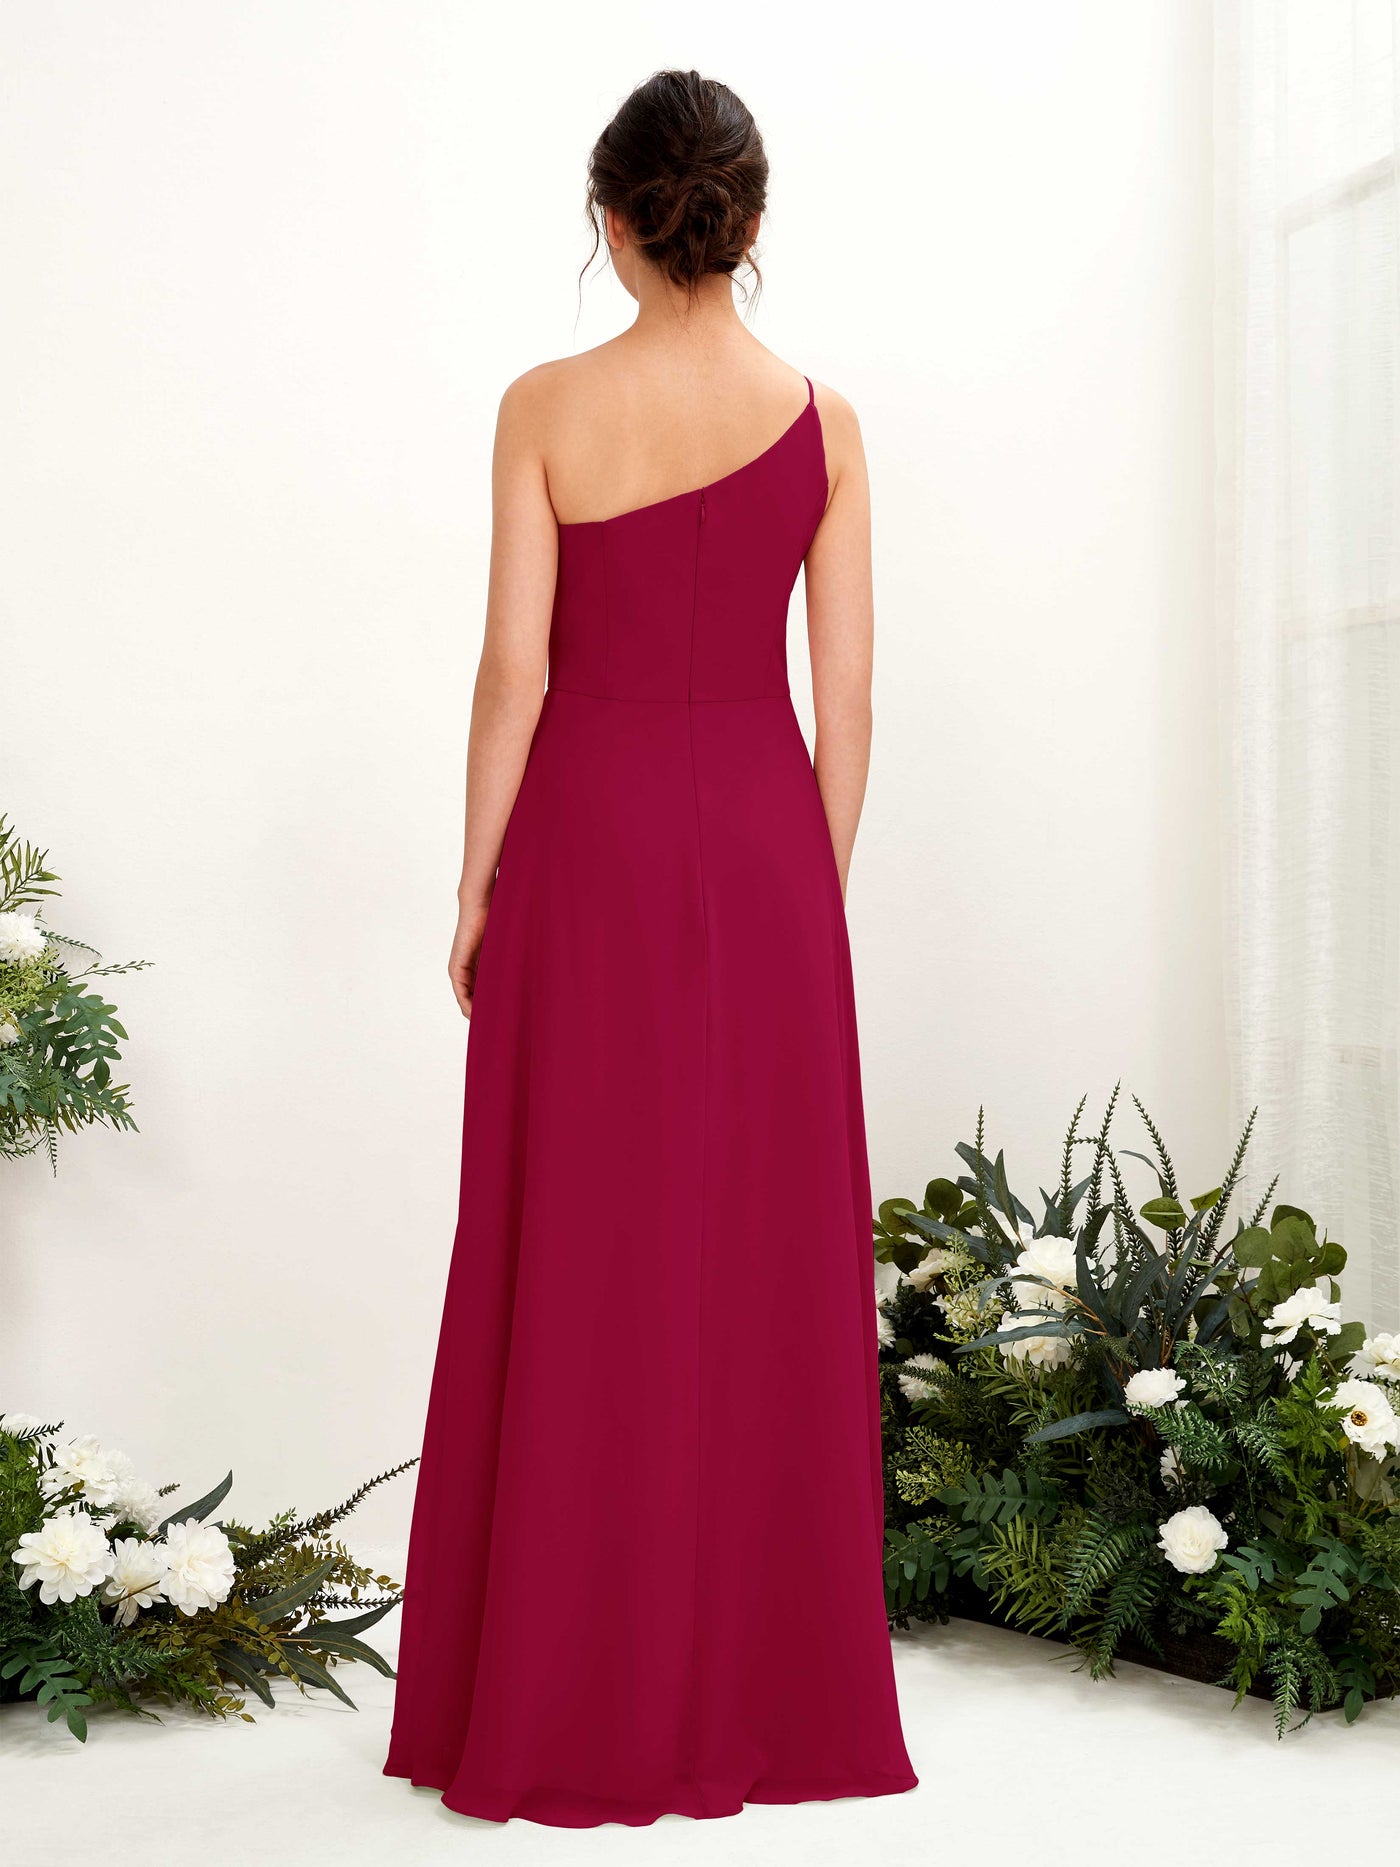 Jester Red Bridesmaid Dresses Bridesmaid Dress A-line Chiffon One Shoulder Full Length Sleeveless Wedding Party Dress (81225741)#color_jester-red